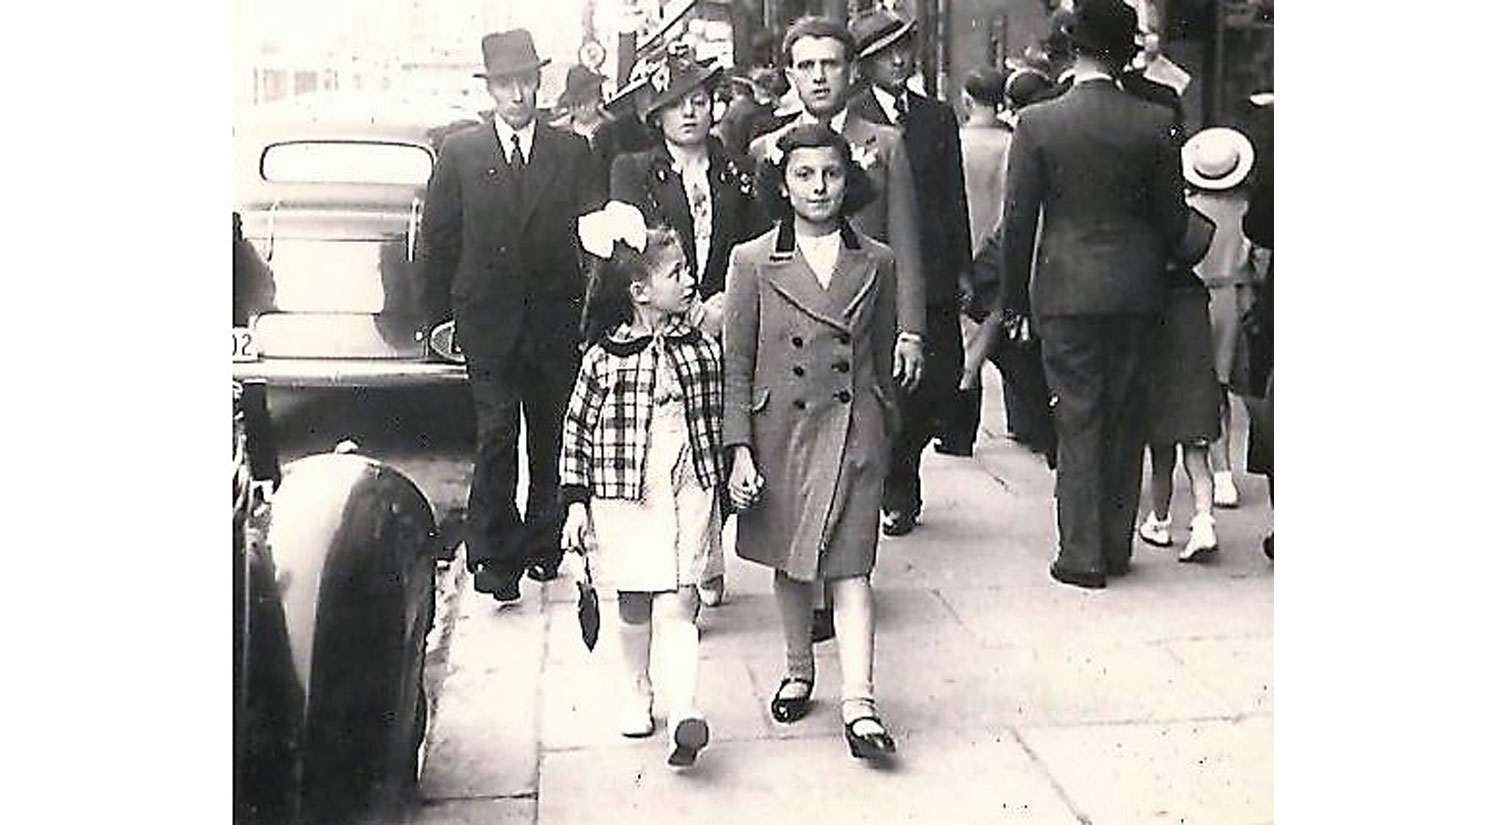 Linda Aronovsky Cox’s mother and her family circa 1939 in Brussels, Belgium. Her mother, Manne Eckstein, next to sister Felicia, with parents Hedwig and Baruch Eckstein behind. Photo courtesy of Linda Aronovsky Cox